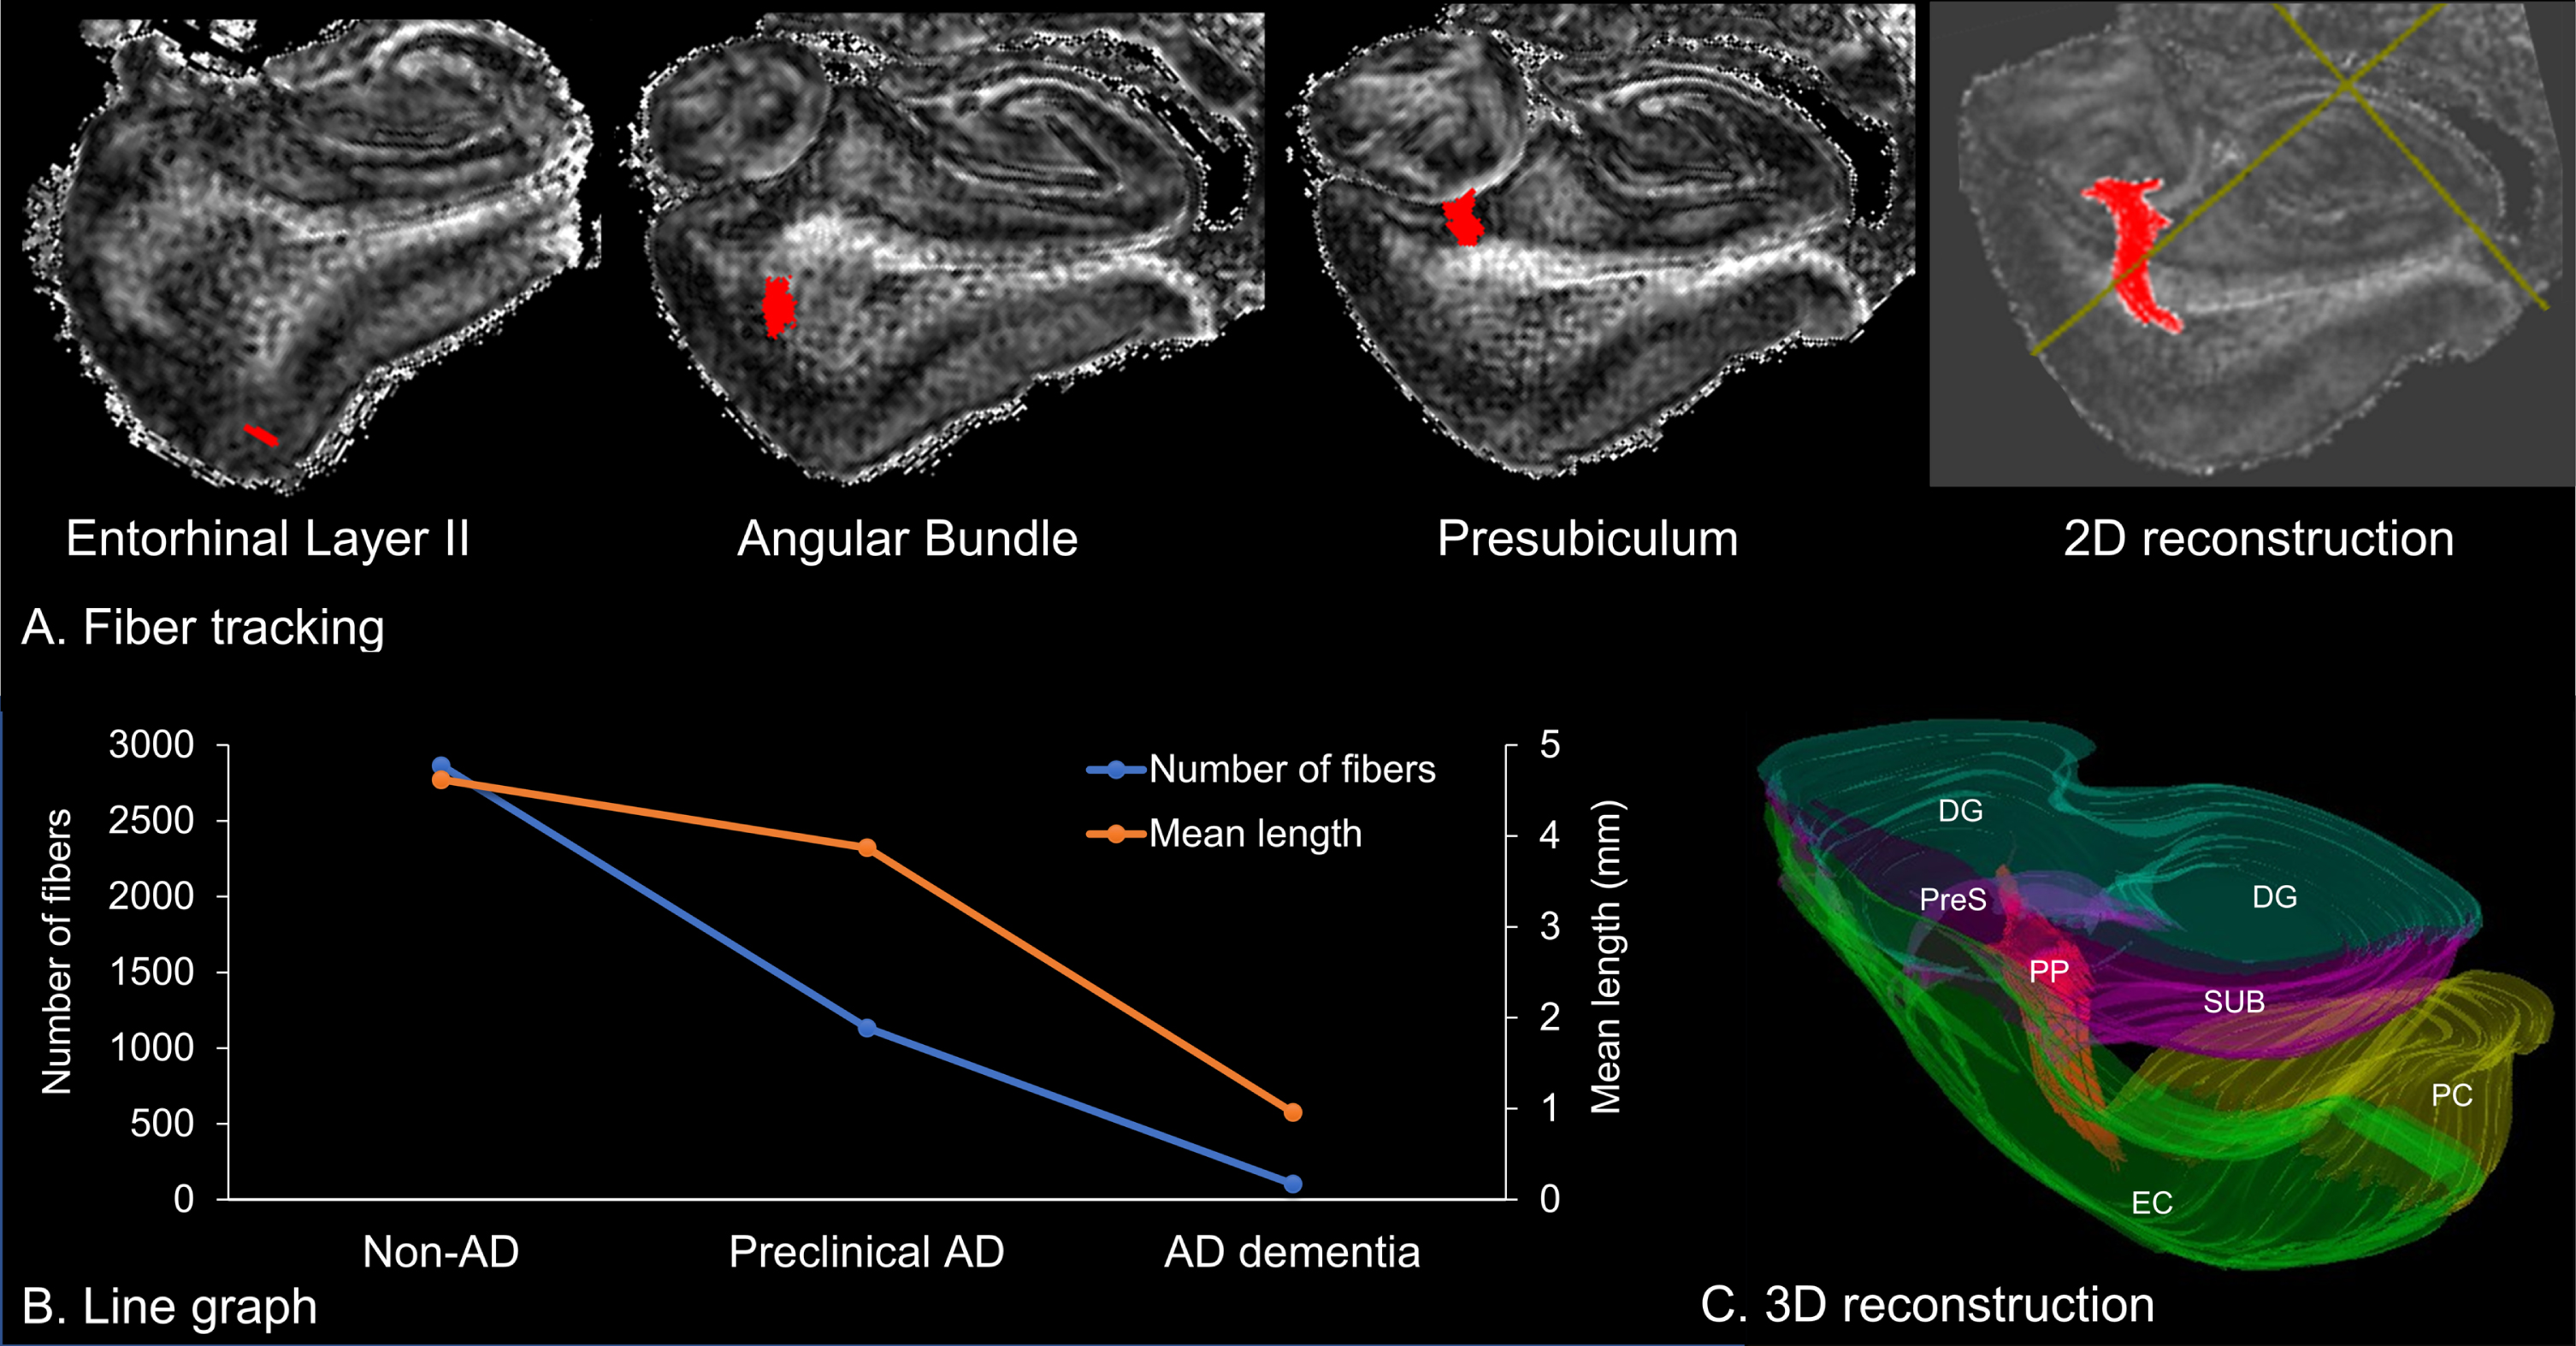 Fiber tractography of the perforant pathway. A) Two-dimensional (2D) reconstruction of the perforant pathway, which originates from the entorhinal layer II and projects to the hippocampus through the angular bundle and the presubiculum. B) Line graph of the number and mean length of fibers. C) Three-dimensional (3D) reconstruction of fibers to the surrounding anatomical structures. DG, dentate gyrus; EC, entorhinal cortex; PC perirhinal cortex; PP, perforant pathway; PreS, presubiculum; SUB, subiculum.